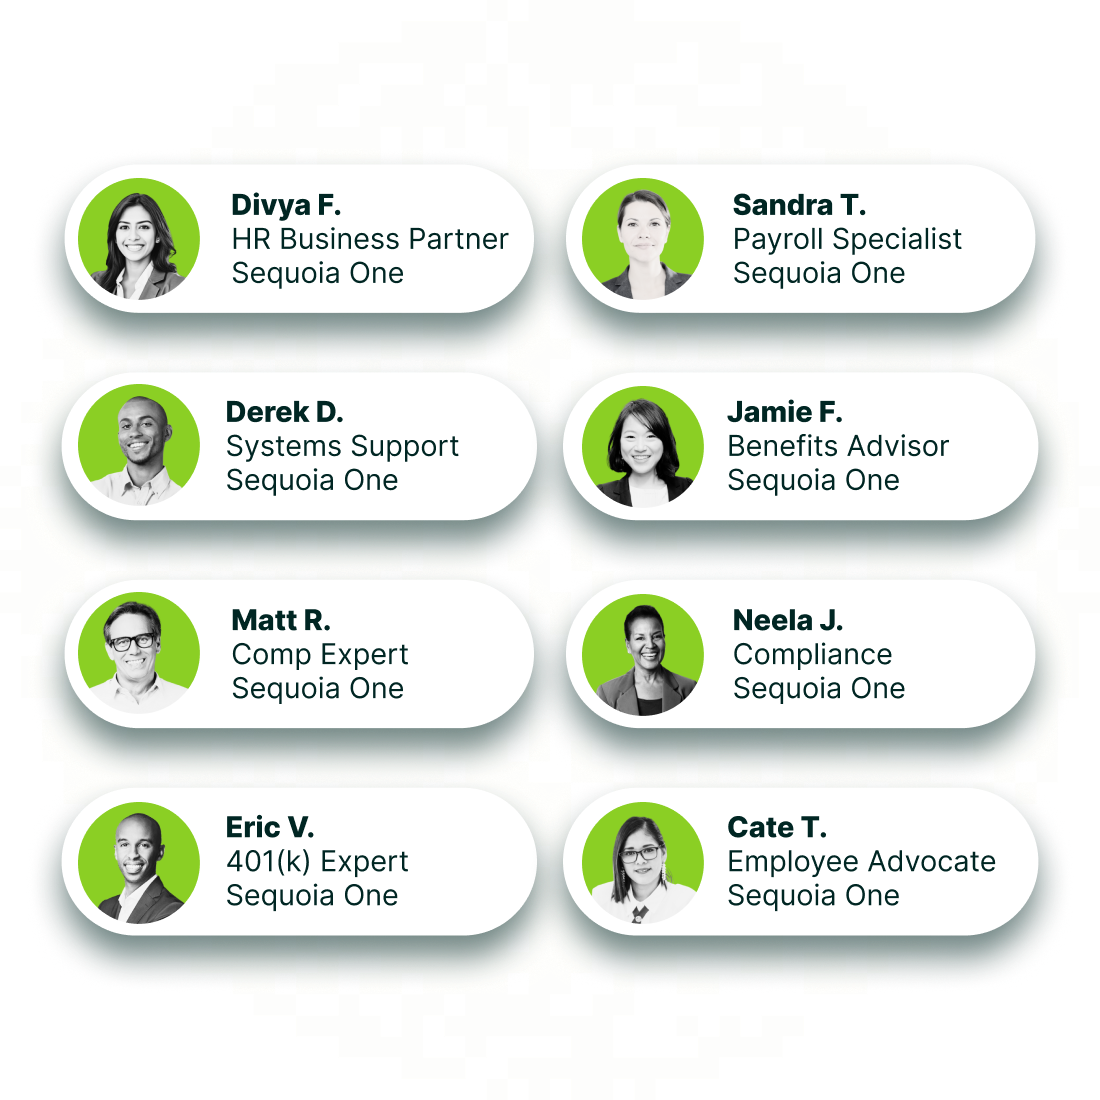 Image of deep team of Sequoia Experts listed by role